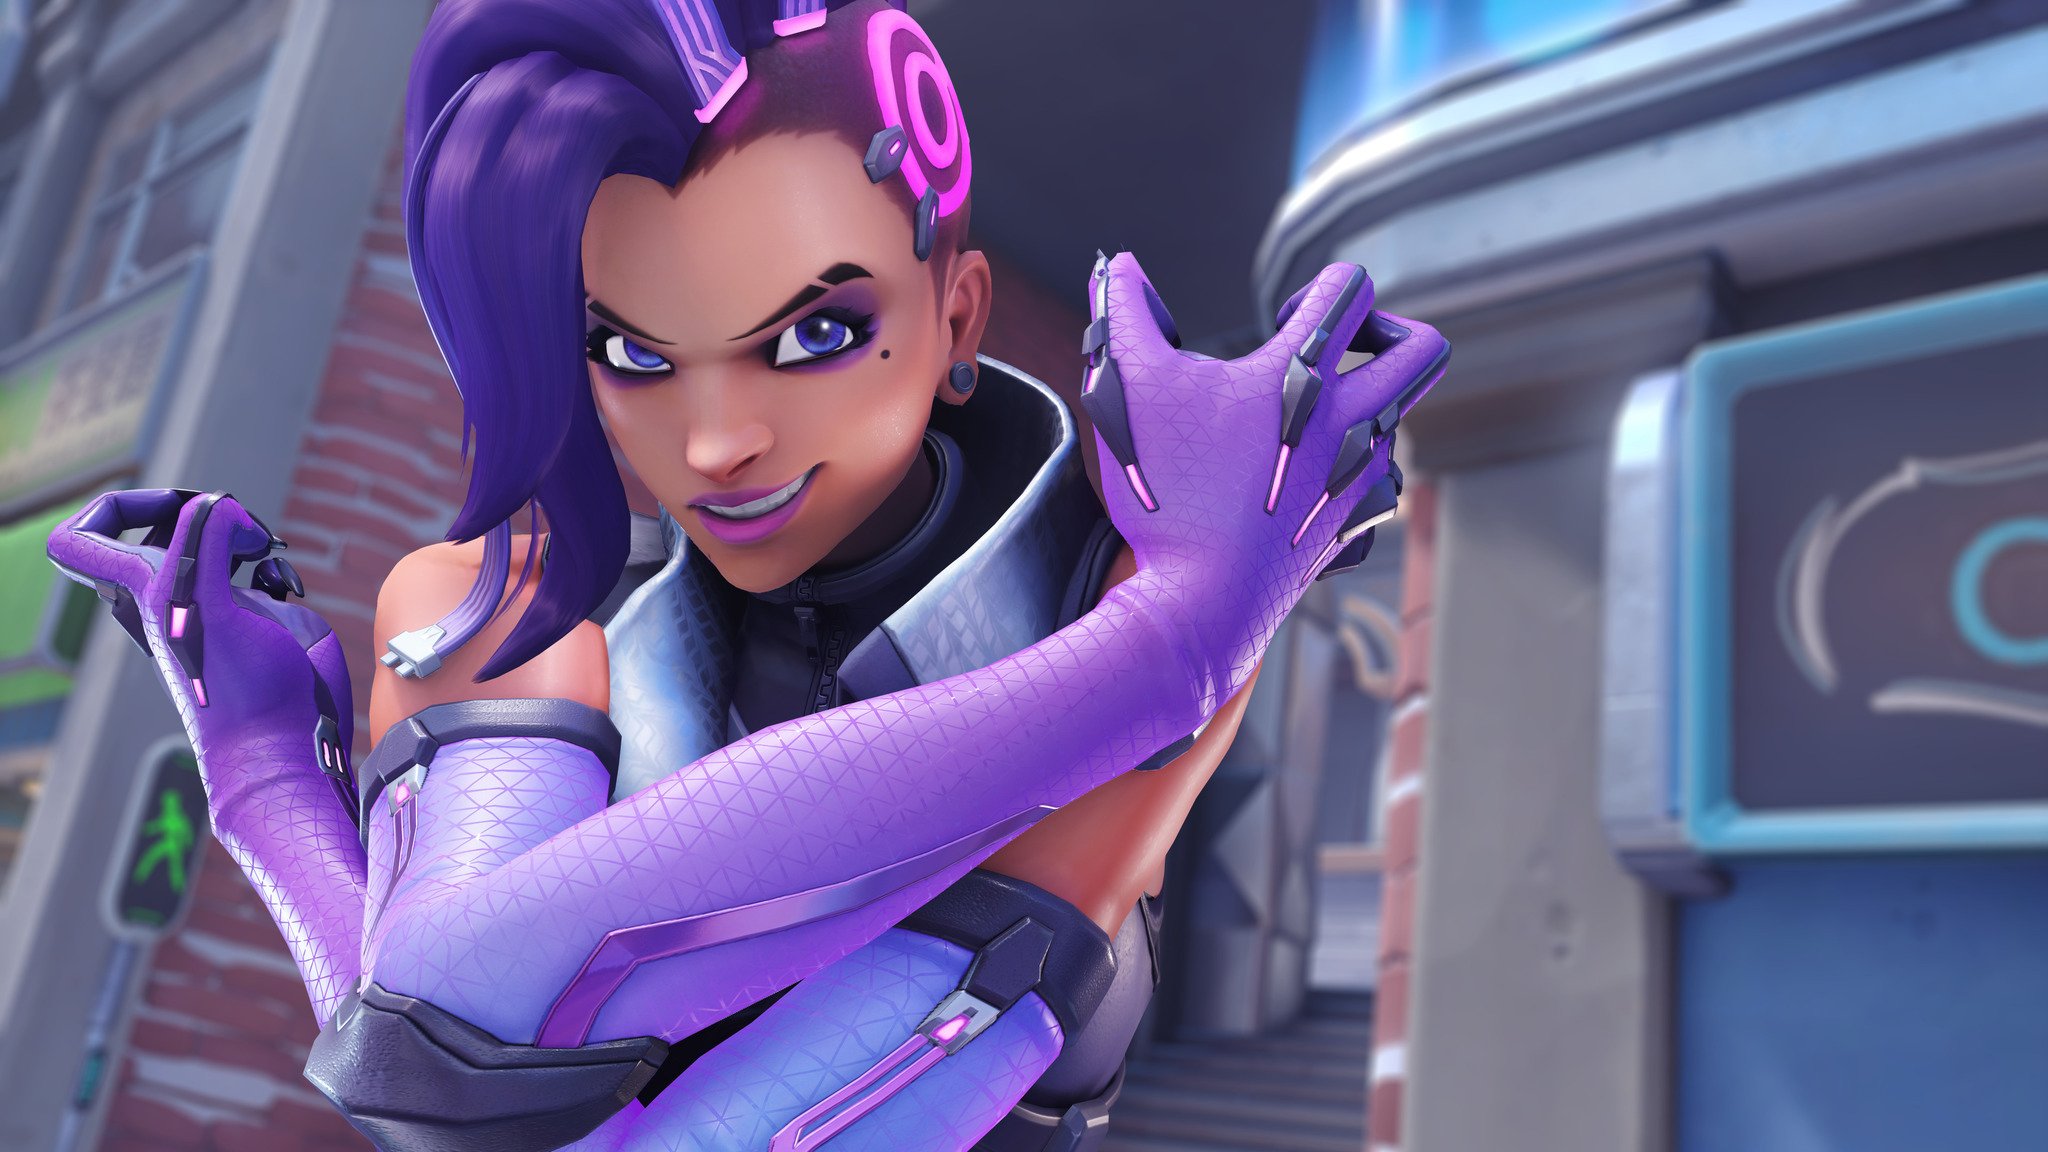 How to get Overwatch Credits in Overwatch 2 - Dot Esports